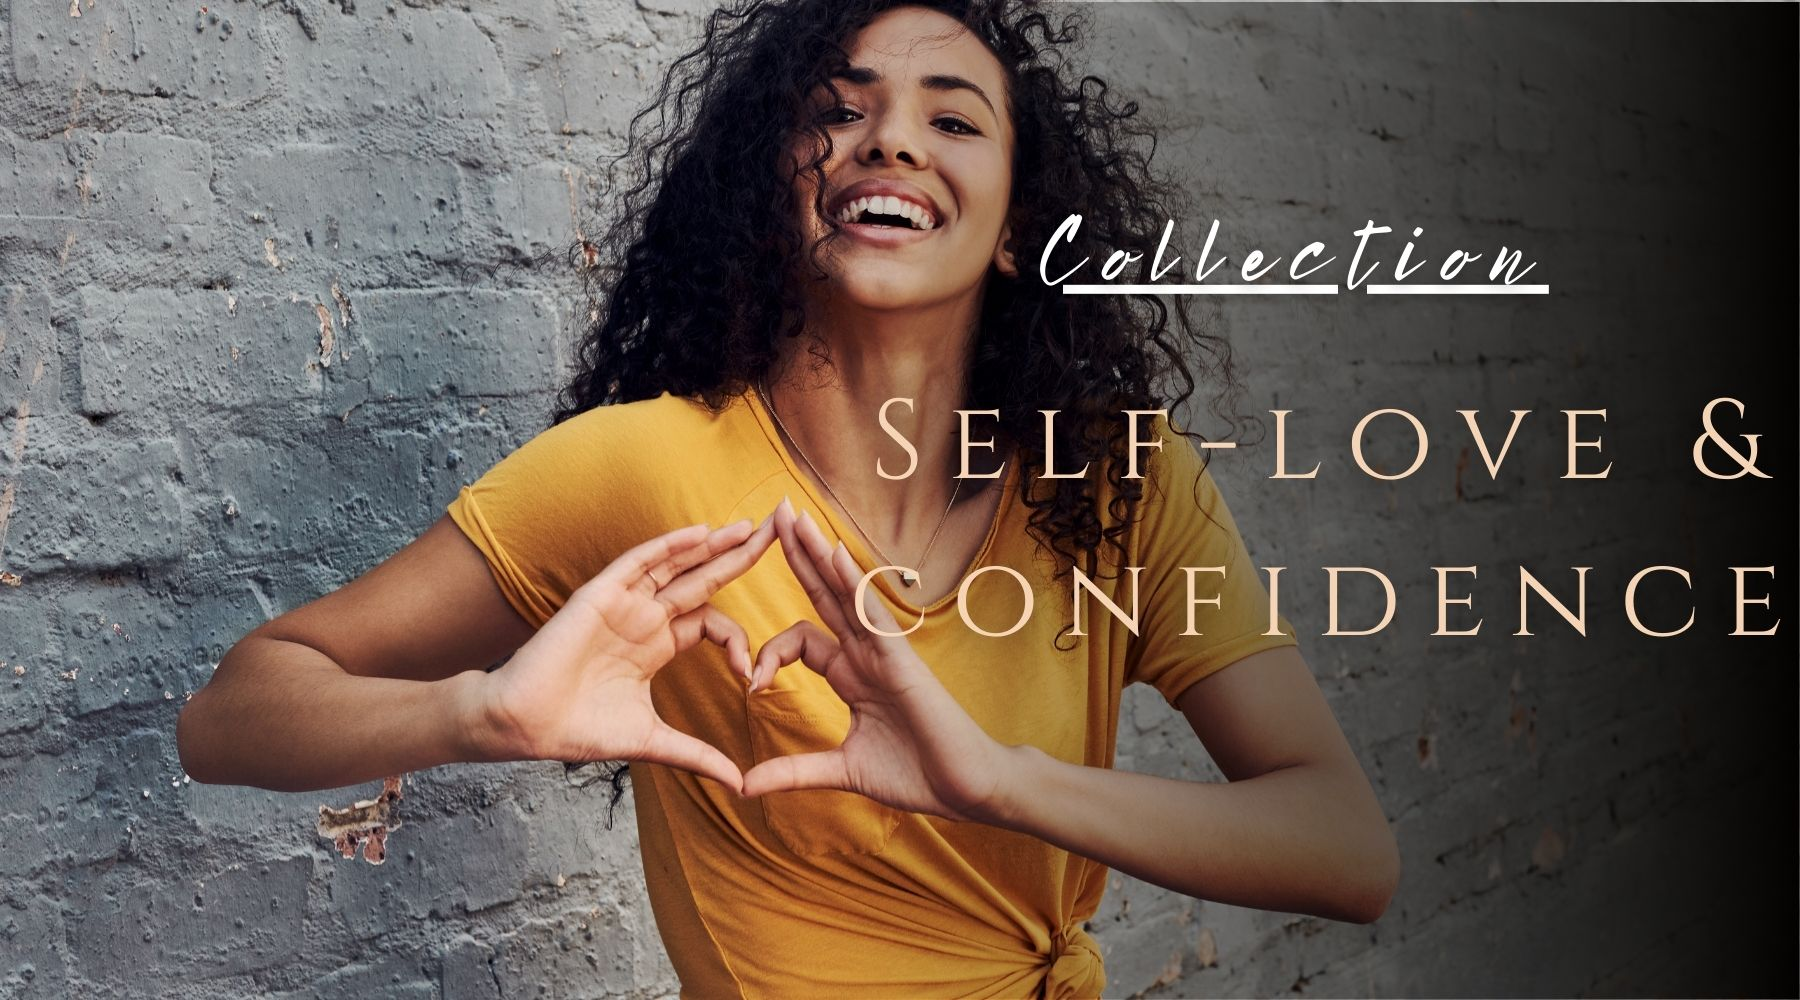 For Self-love & Confidence